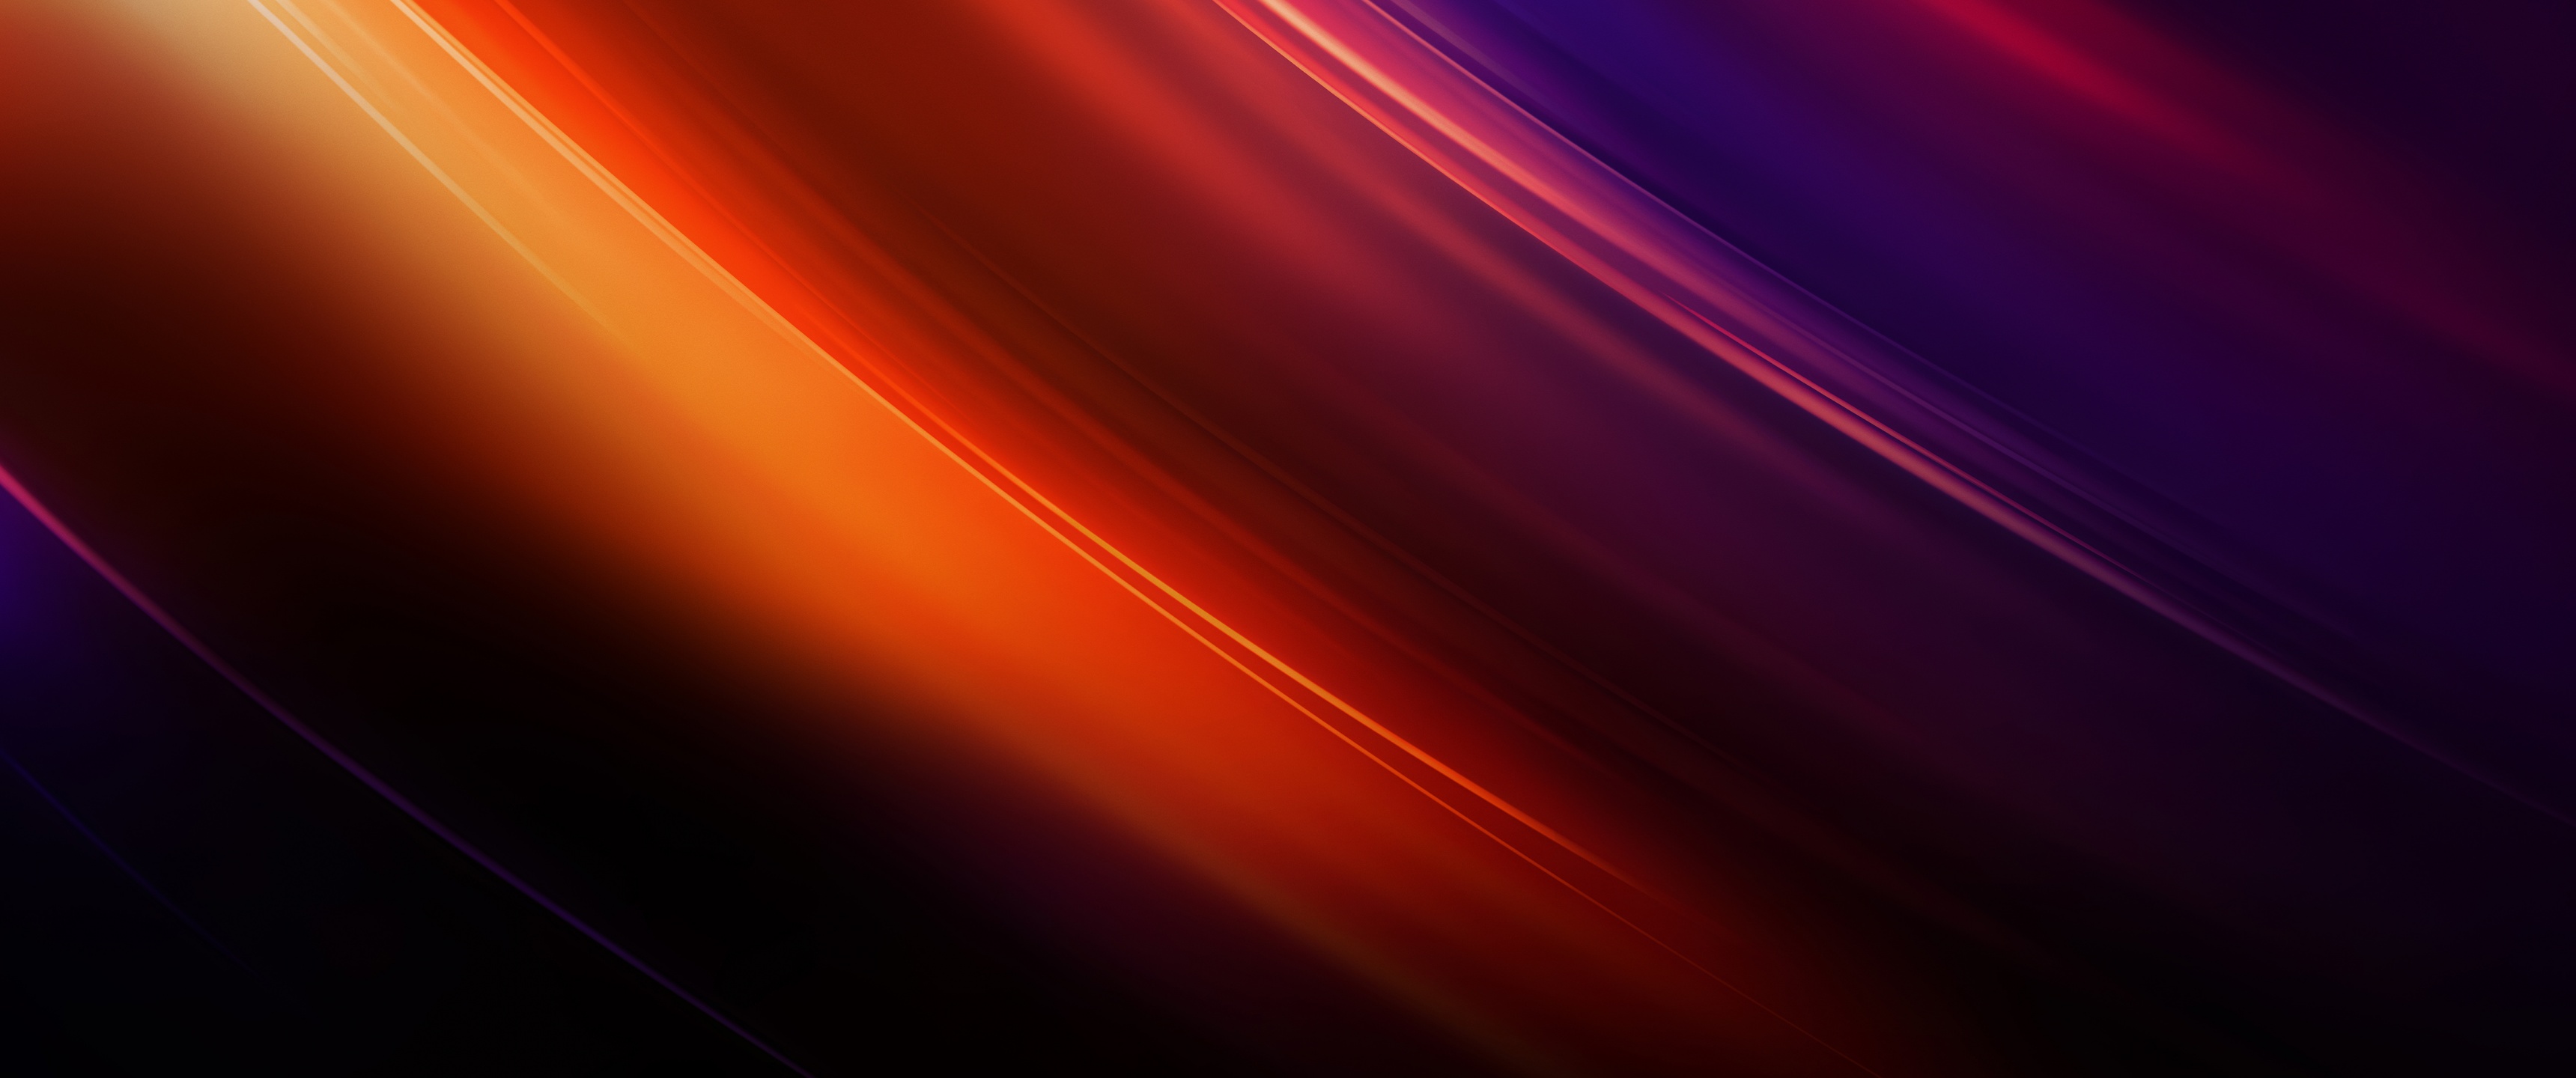 Download All the OnePlus 8 Wallpapers Right Here  Beebom